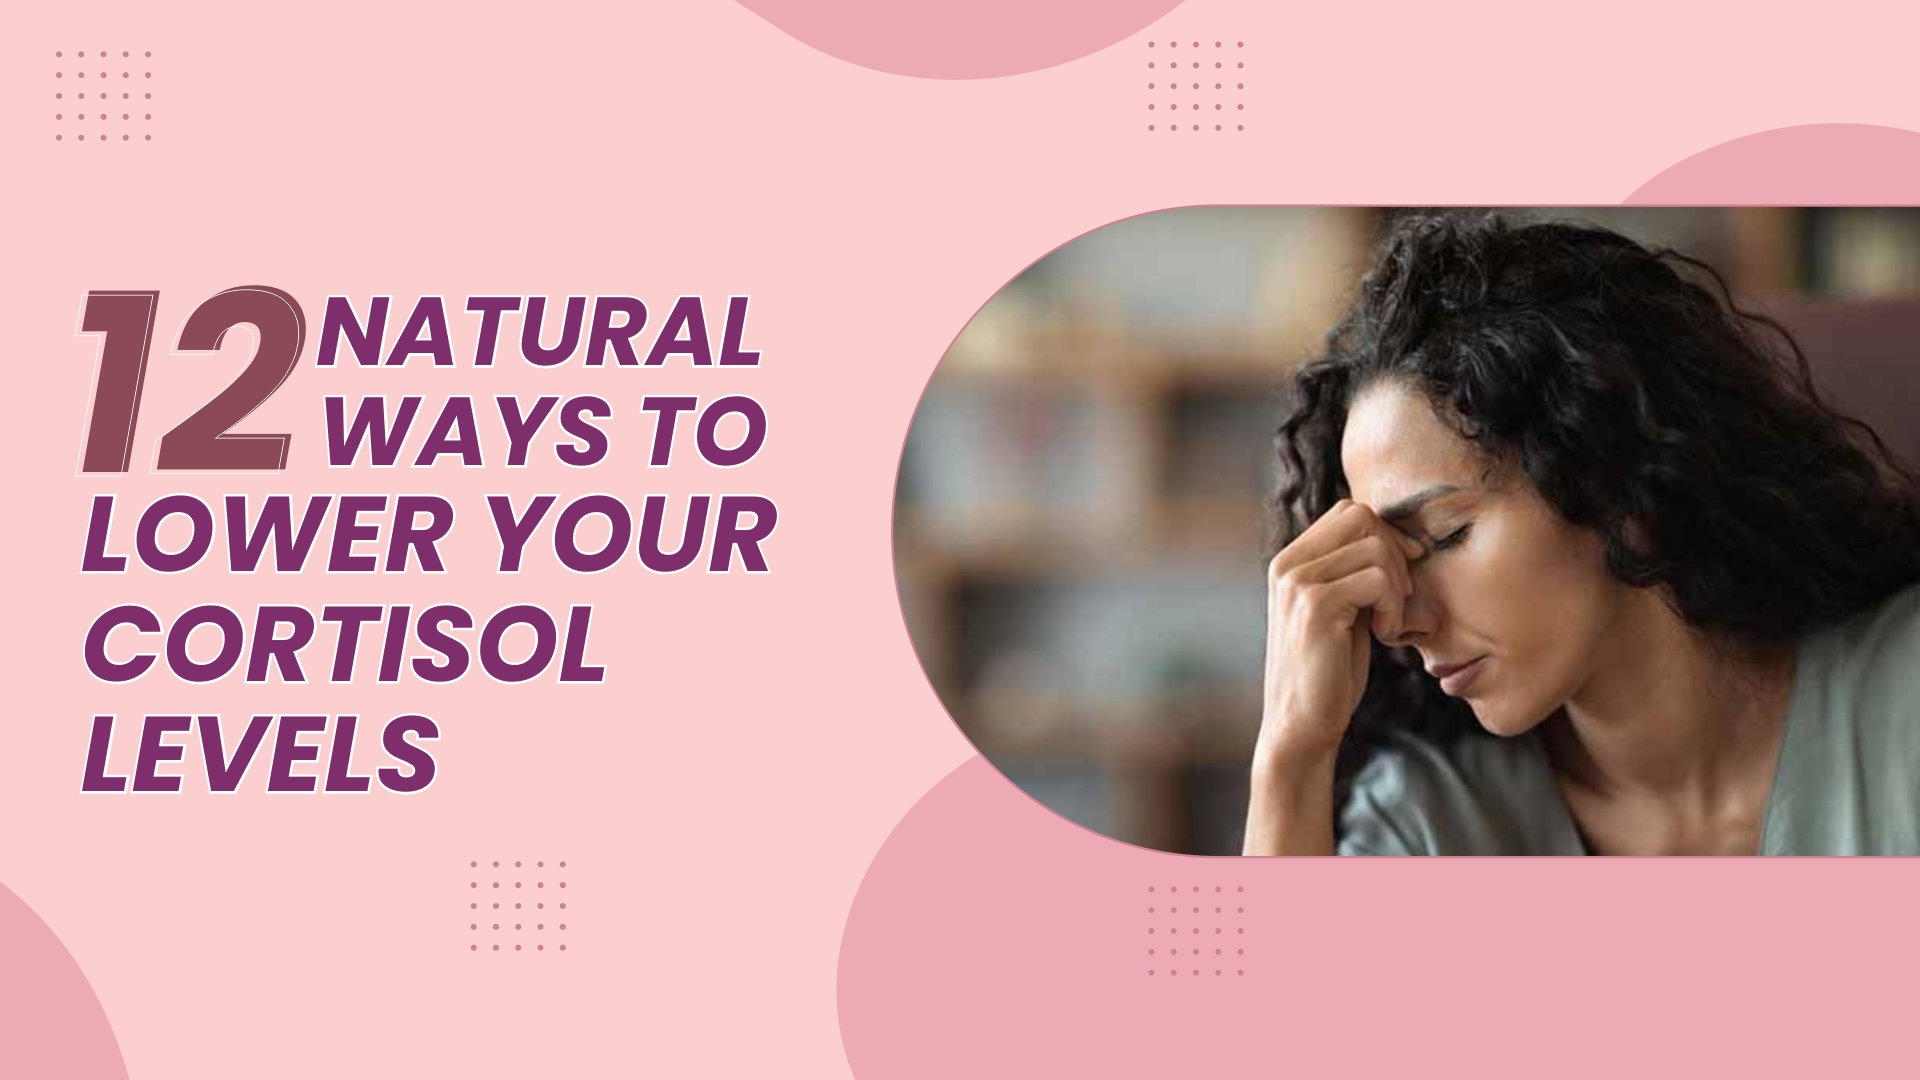 12 Natural Ways to Lower Your Cortisol Levels